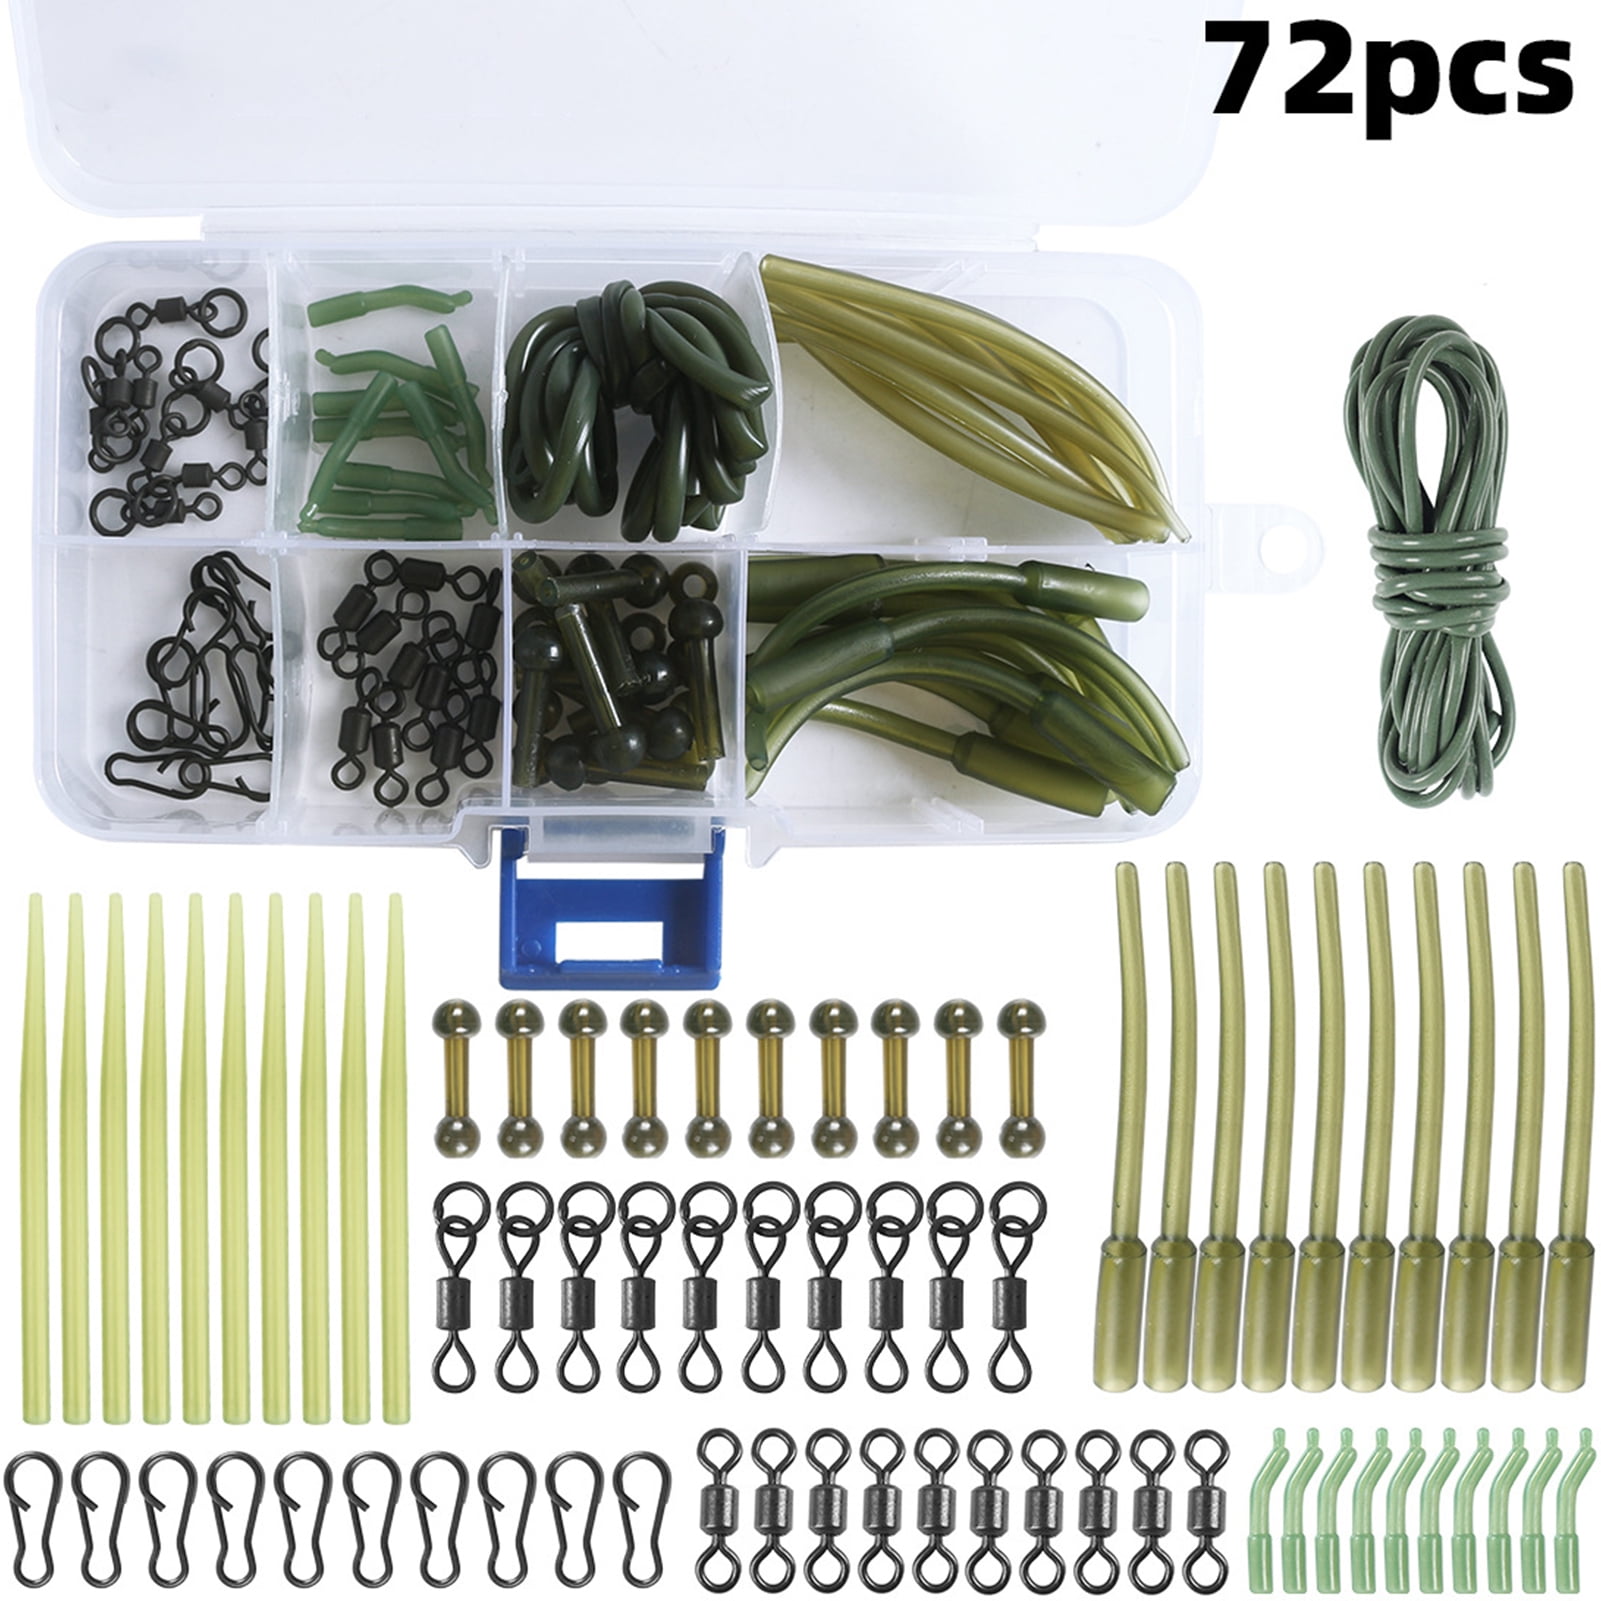 Black/Green/Clear Strong/Lightweight Quality Hook Stops/Beads for Carp Fishing 